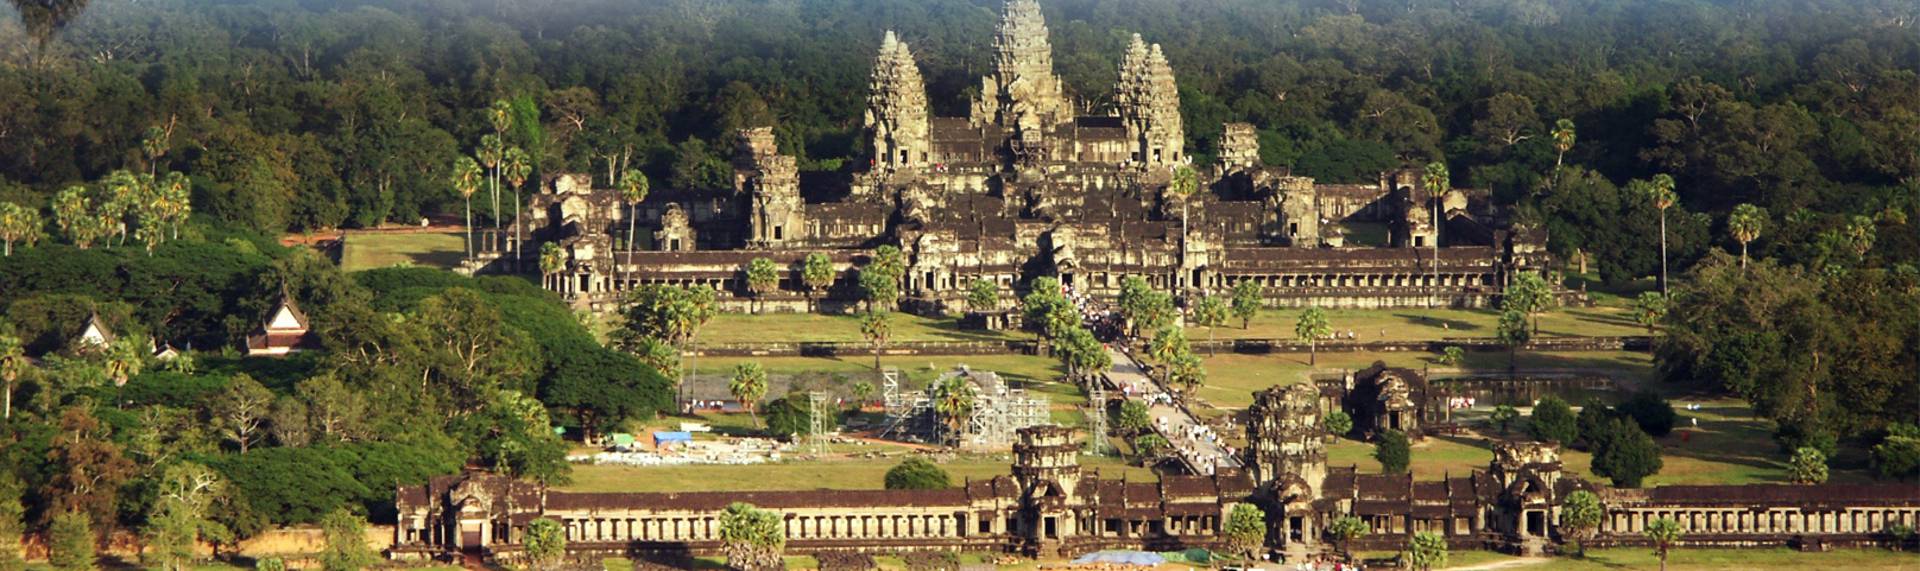 Cambodia with awe-inspiring temples